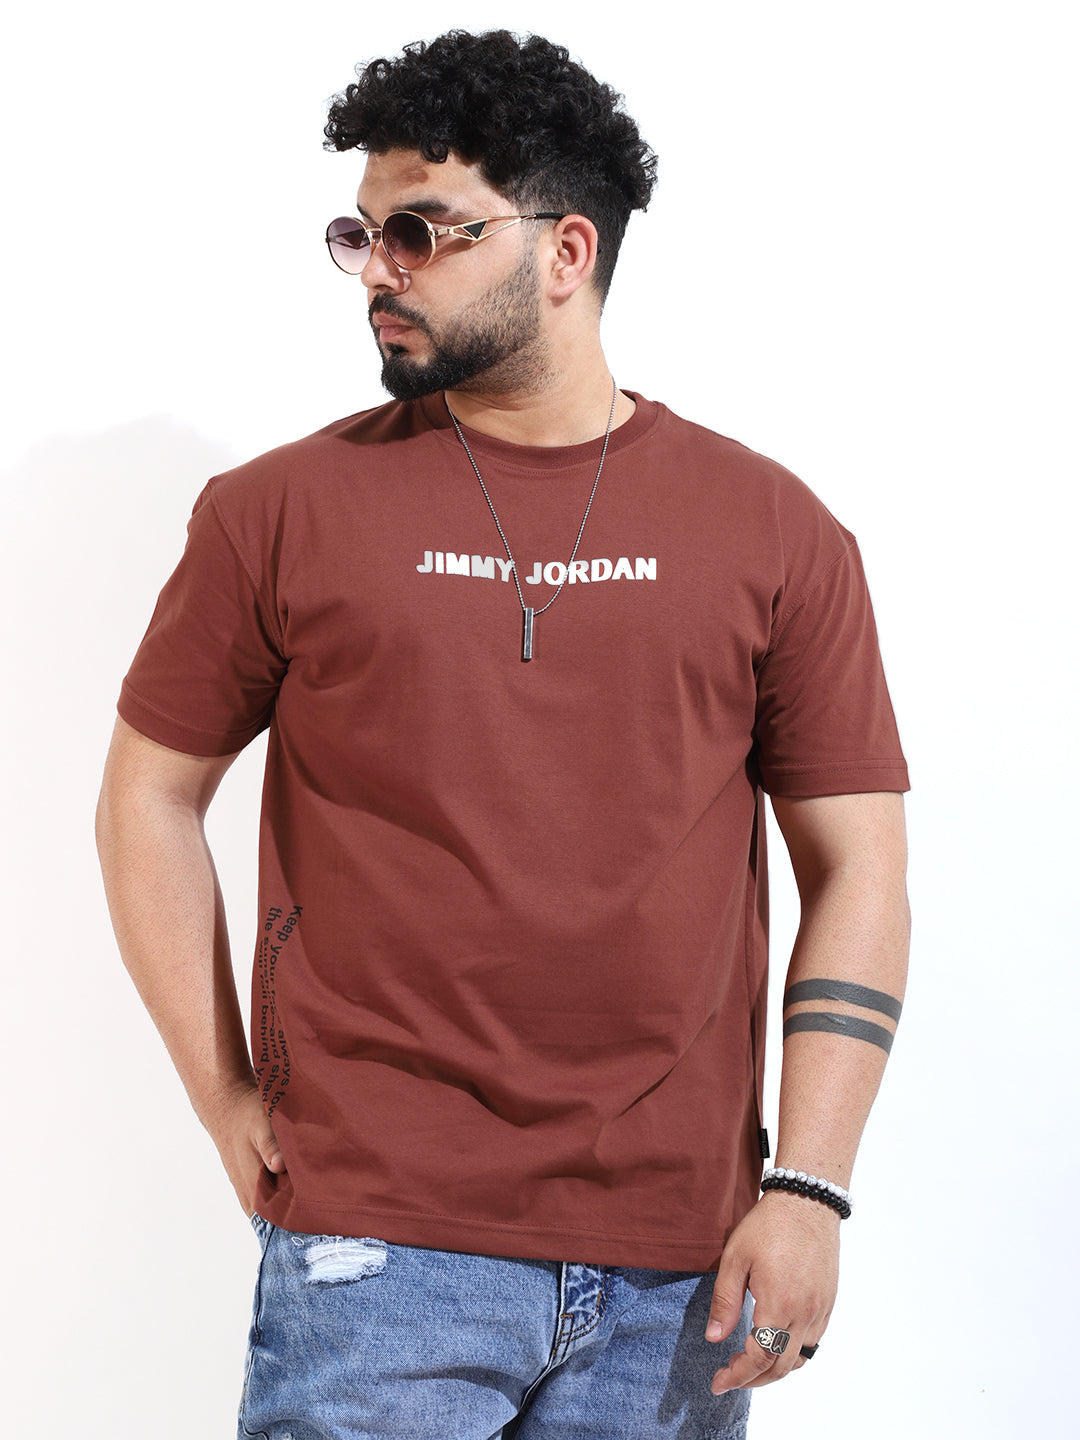 The Square Oversized Brown T-Shirt